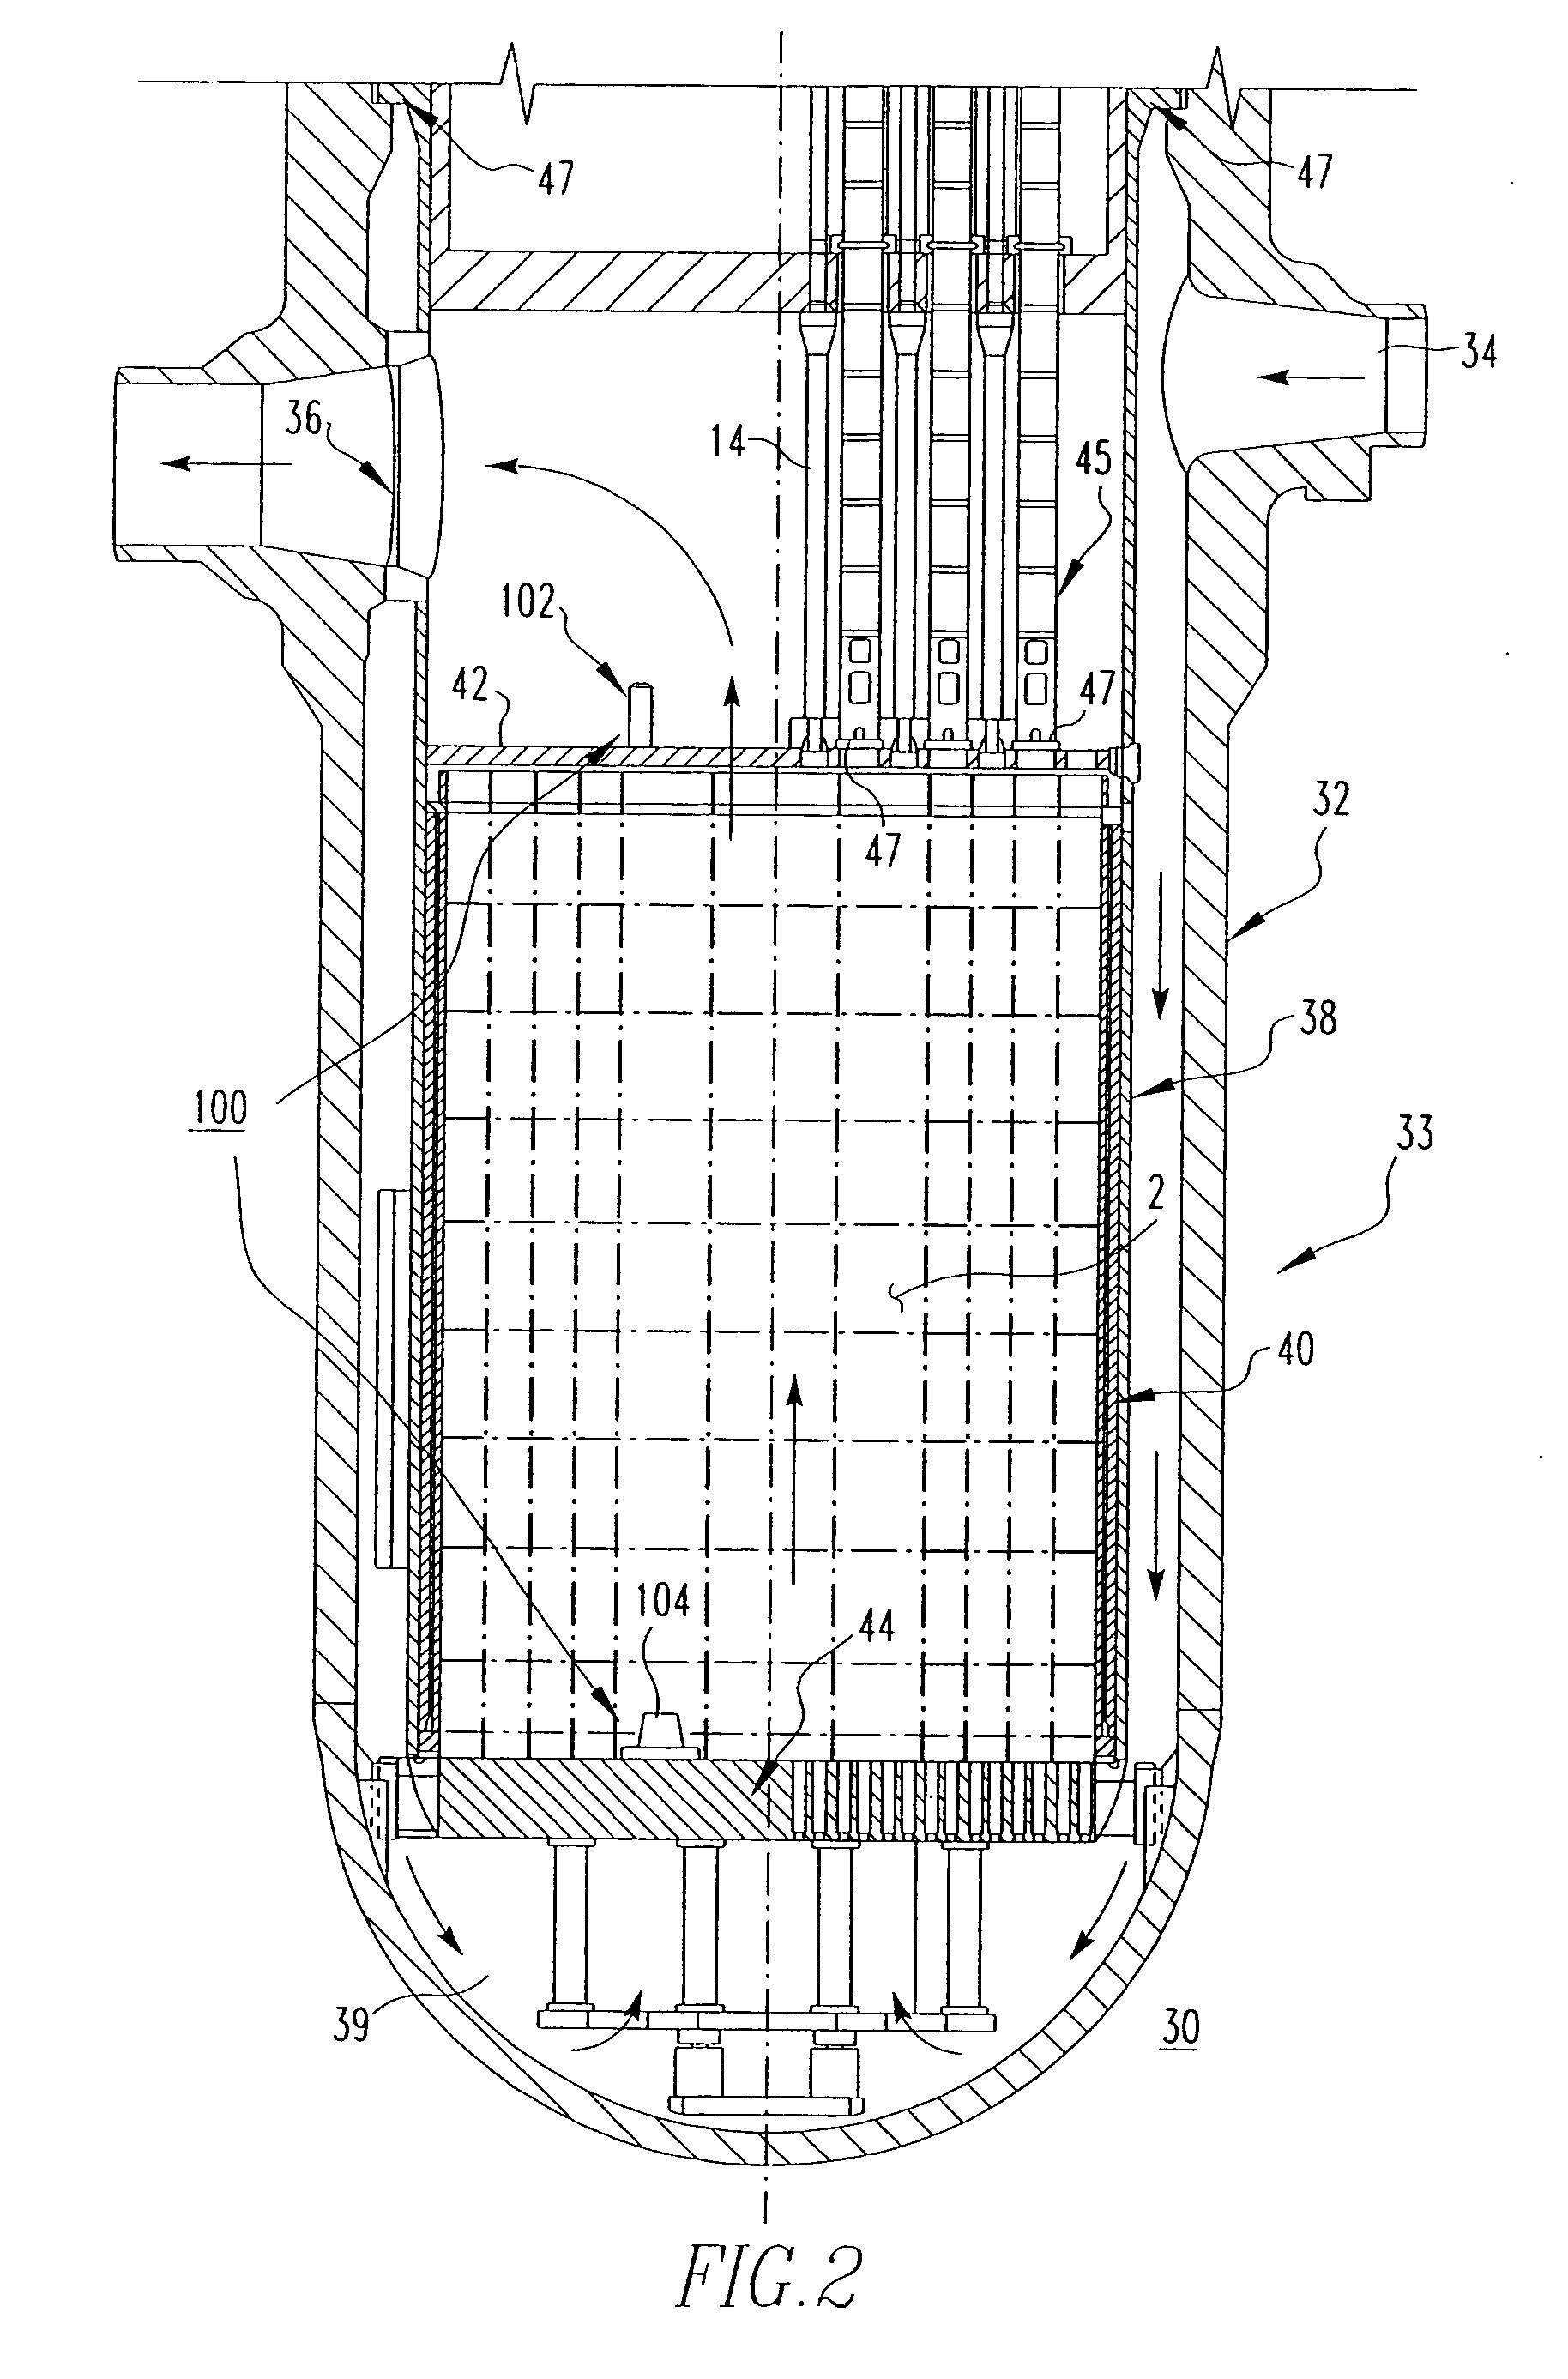 In-core fuel restraint assembly